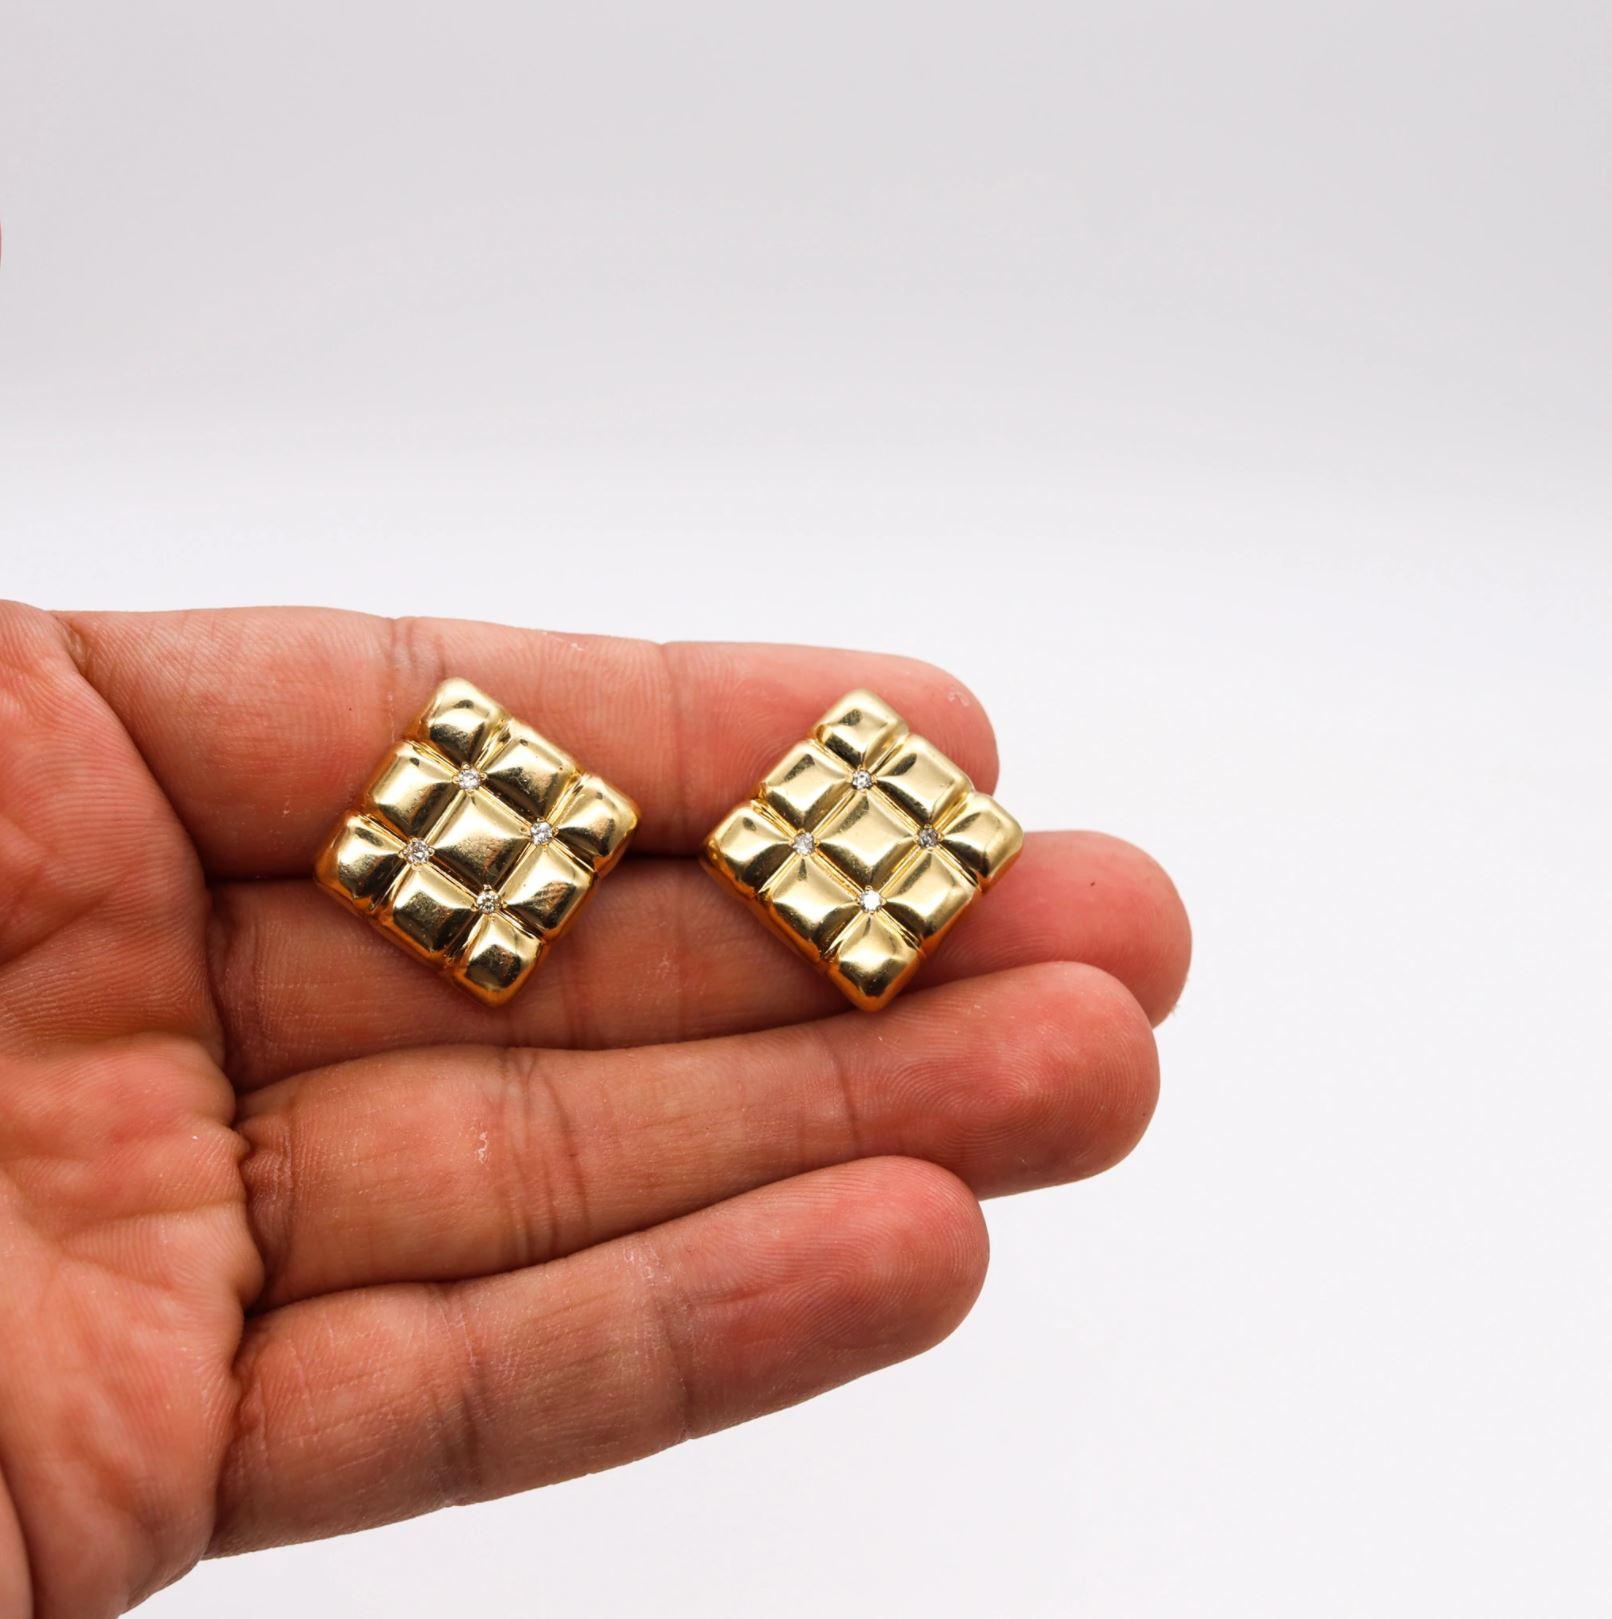 Modernist Aldo Cipullo 1970 New York Quilted Clip Earrings 18Kt Yellow Gold with Diamonds For Sale